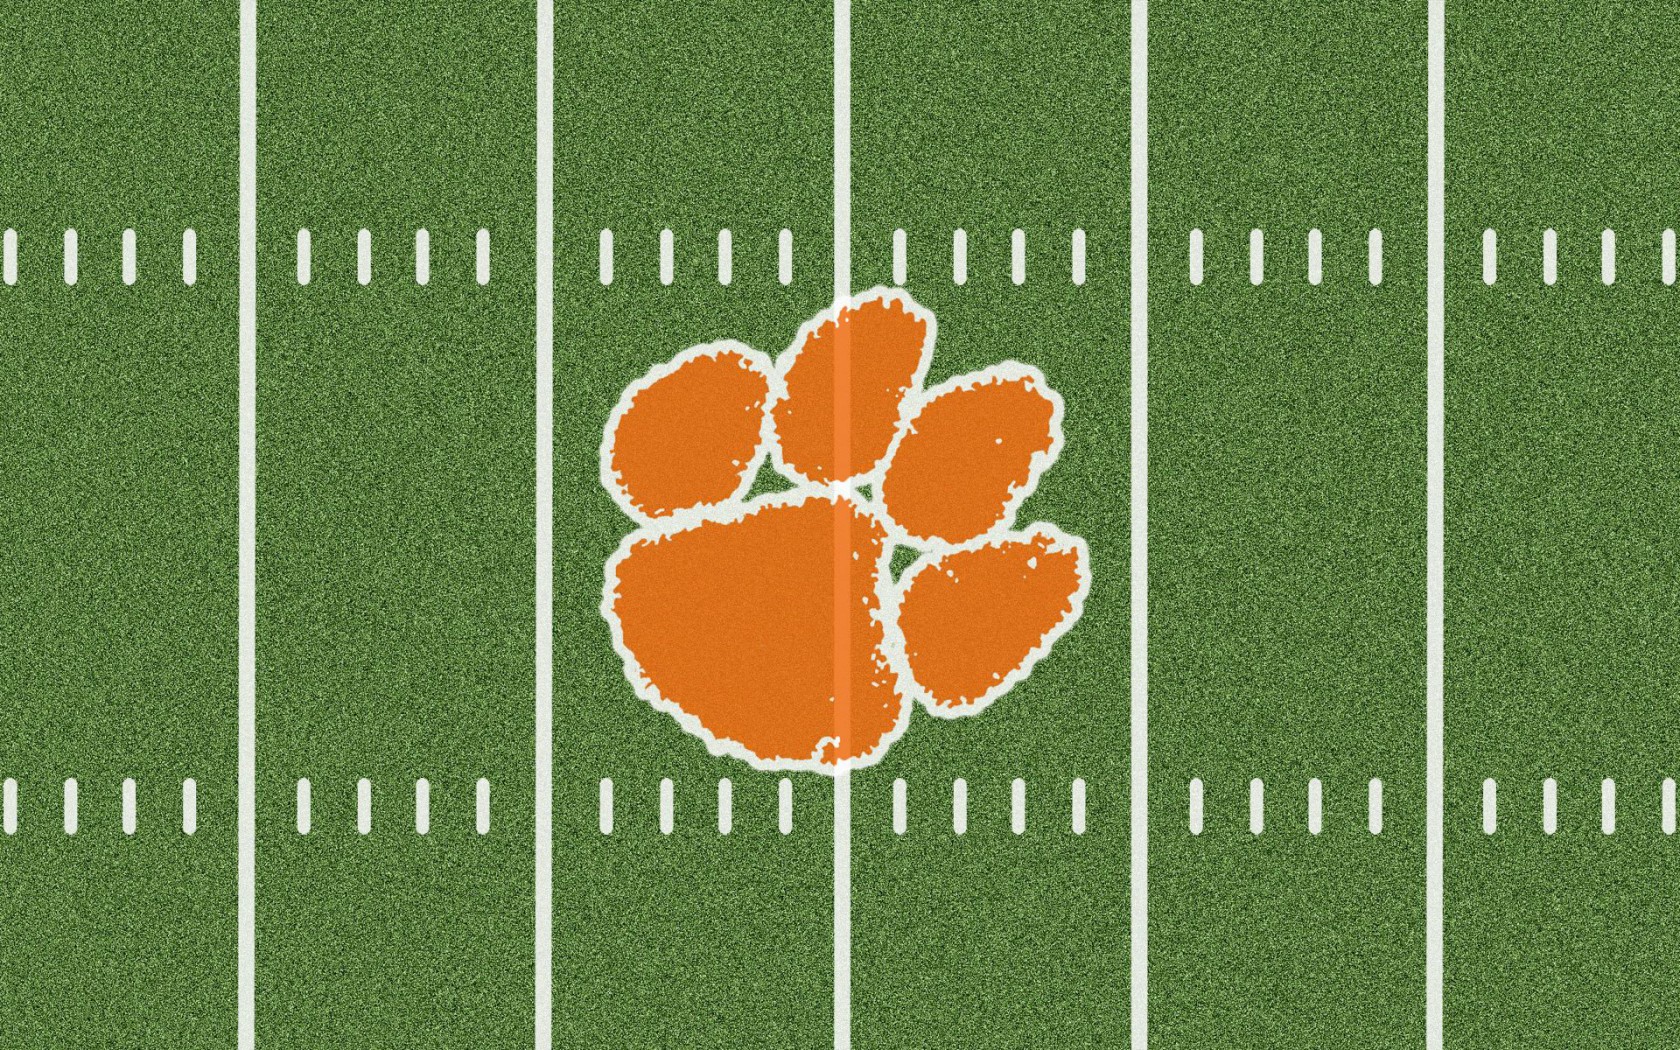 Football Field Clemson Logo On With Resolutions